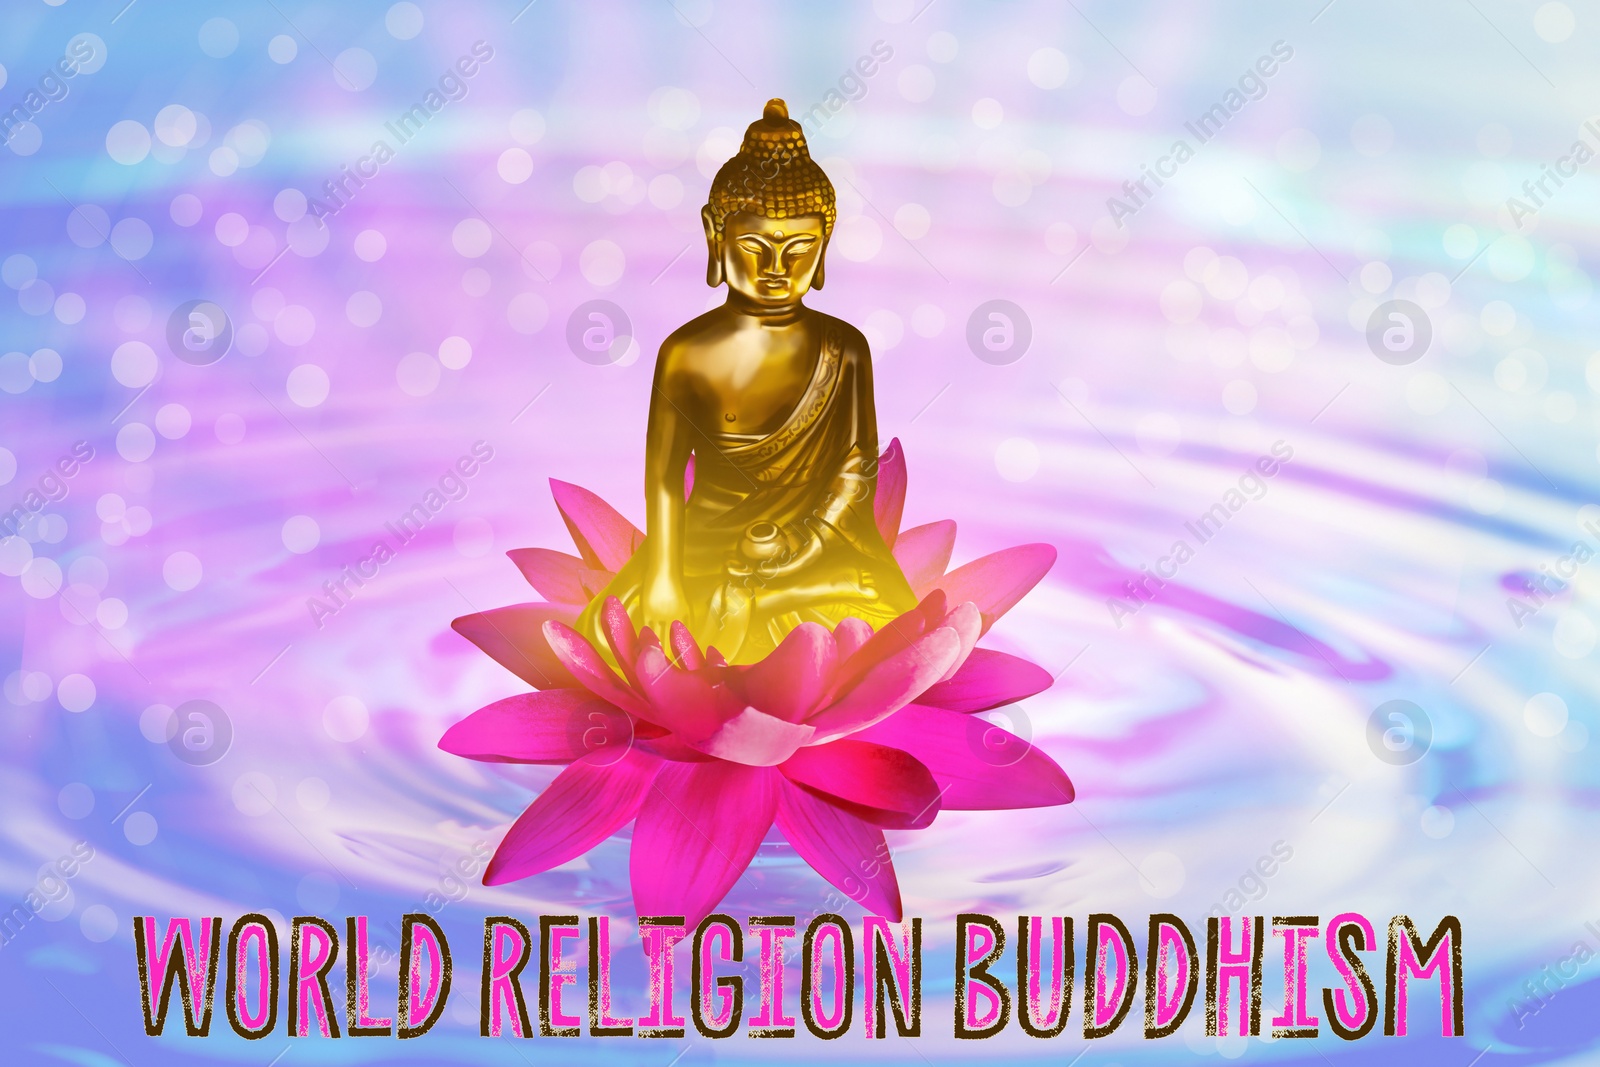 Image of Lotus flower with Buddha figure on water and text World Religion Buddhism